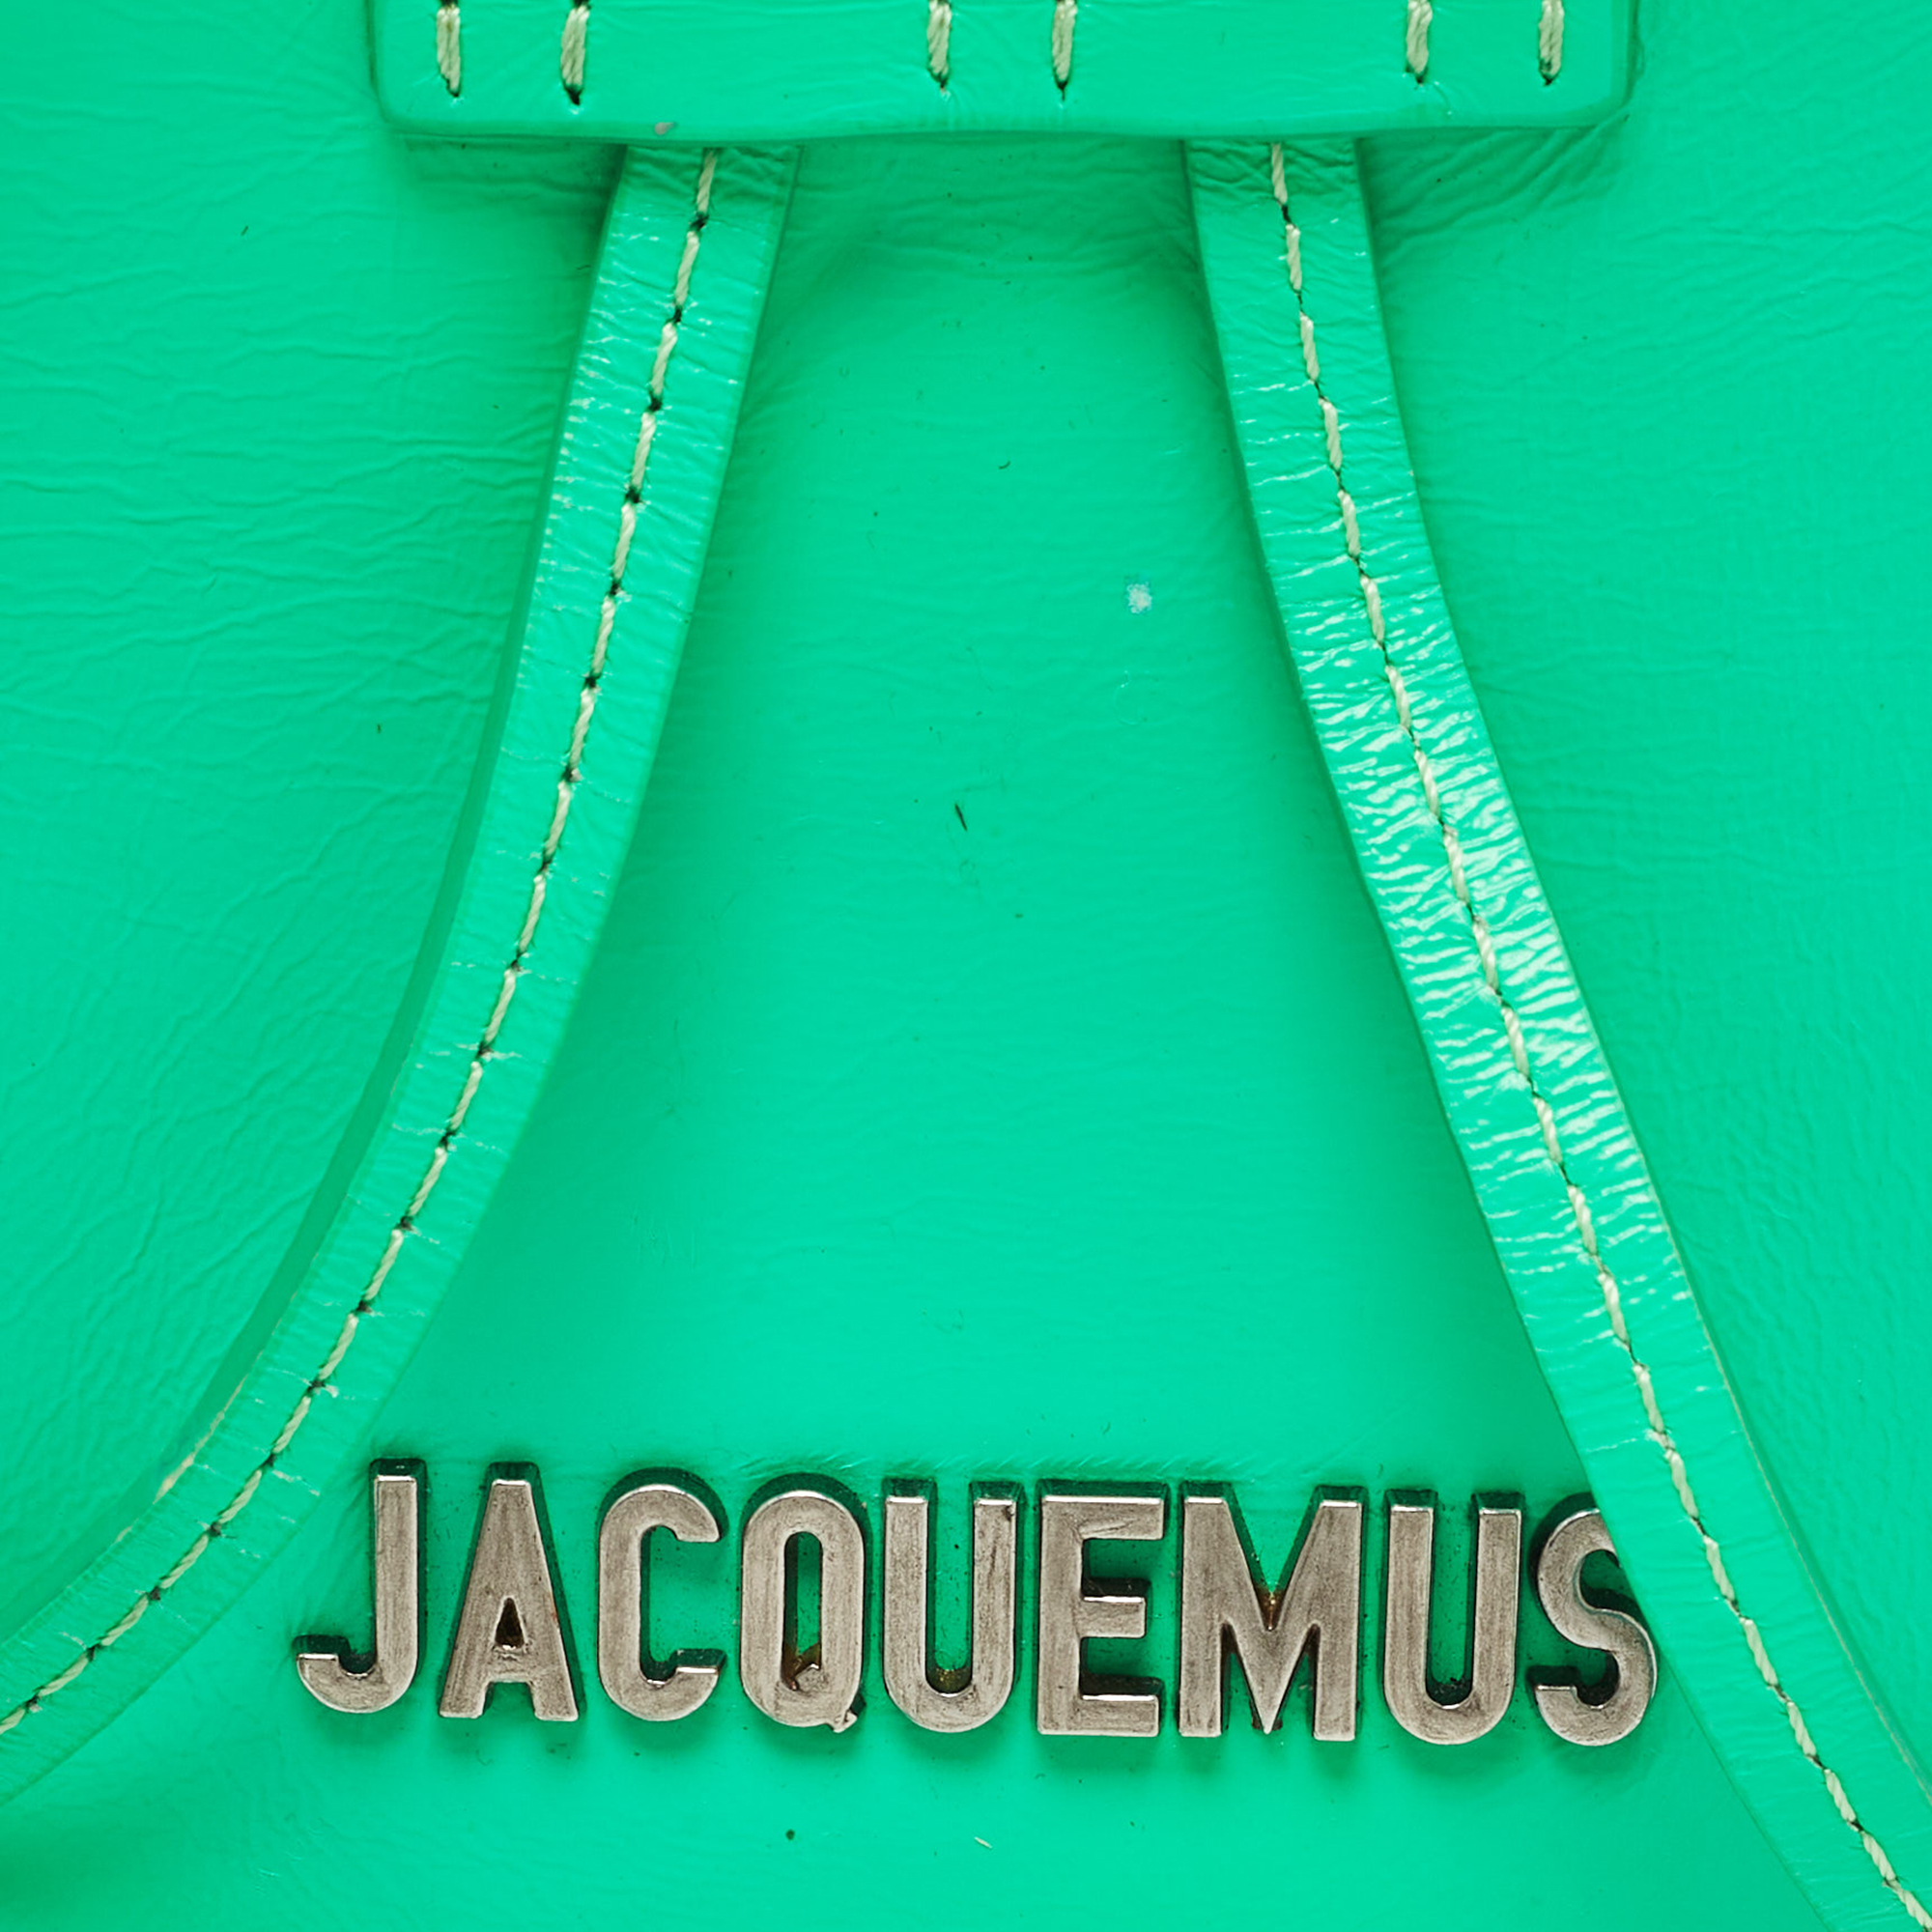 Jacquemus Green Leather Le Pitchou Round Neck Pouch